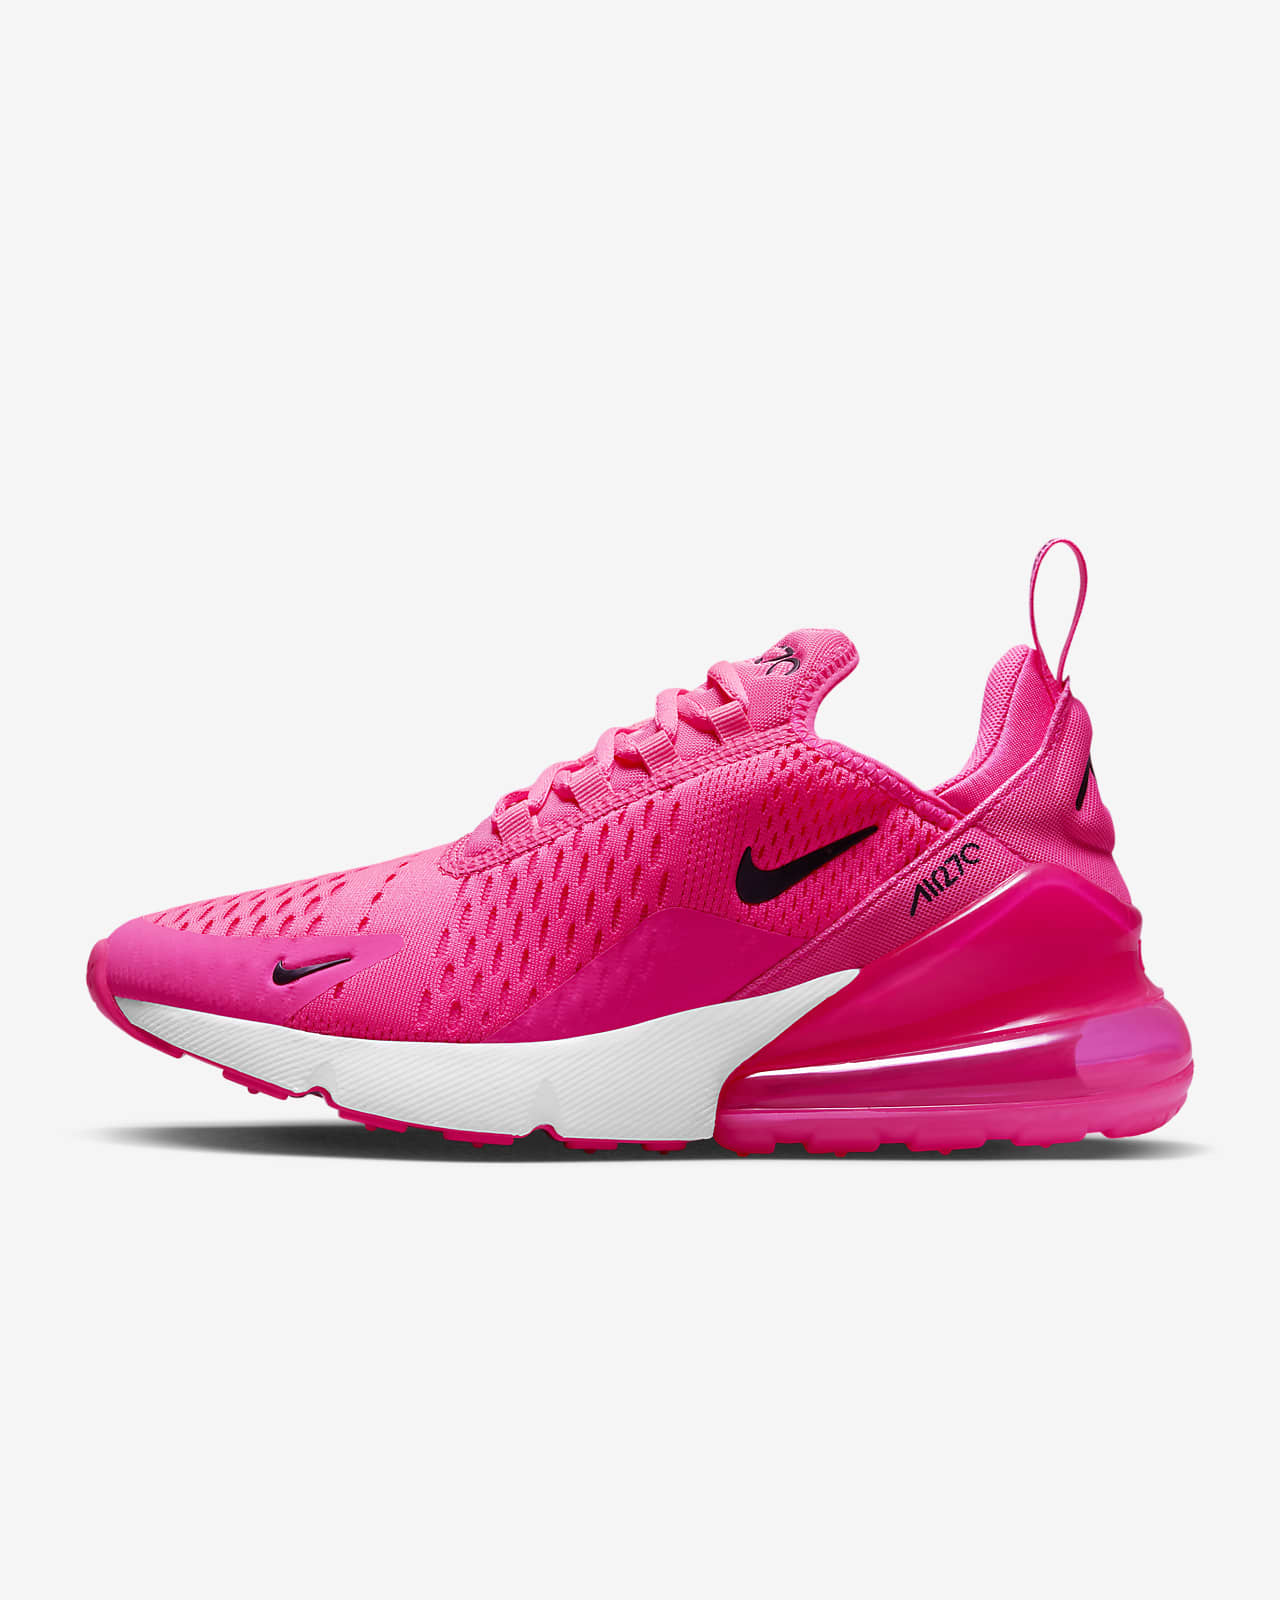 size 3 nike air max 270 shoes